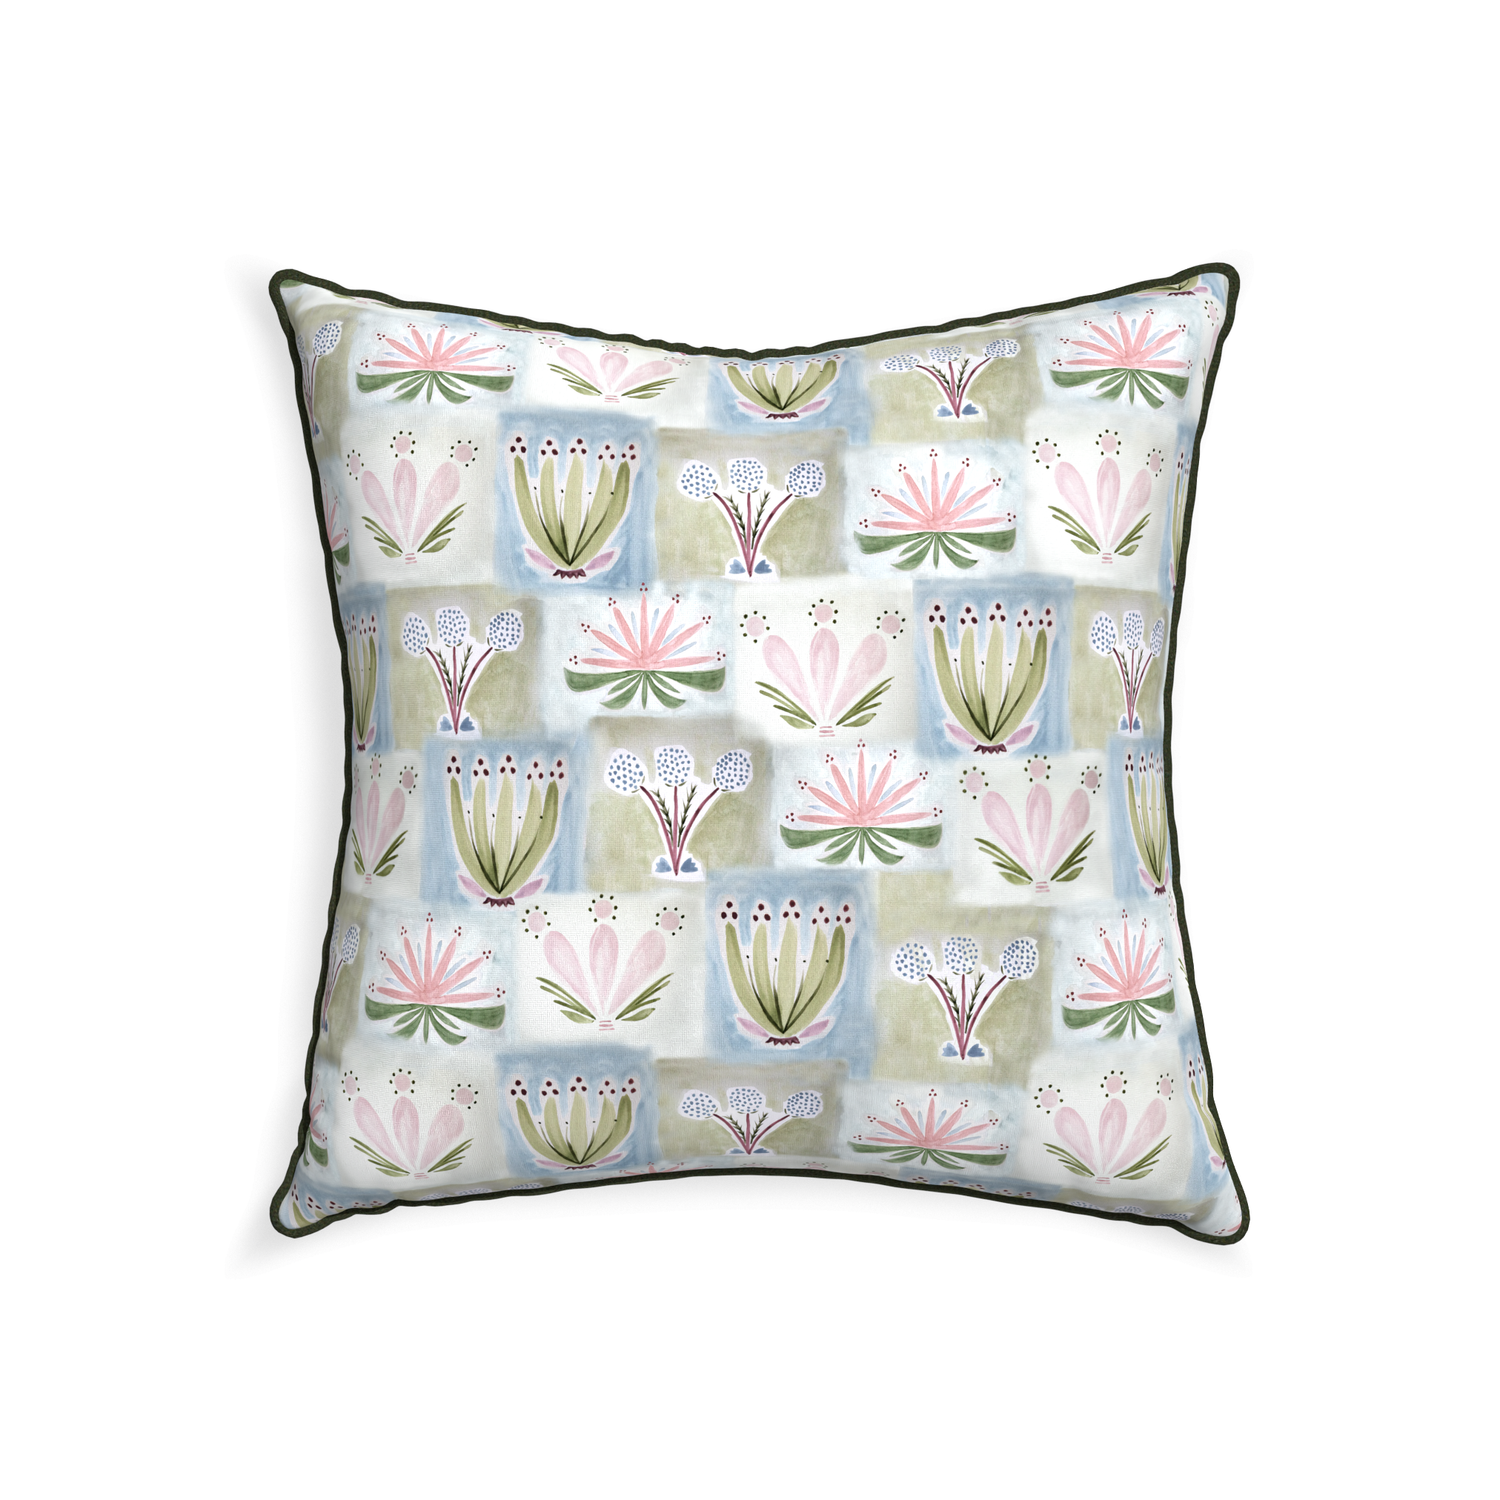 22-square harper custom hand-painted floralpillow with f piping on white background